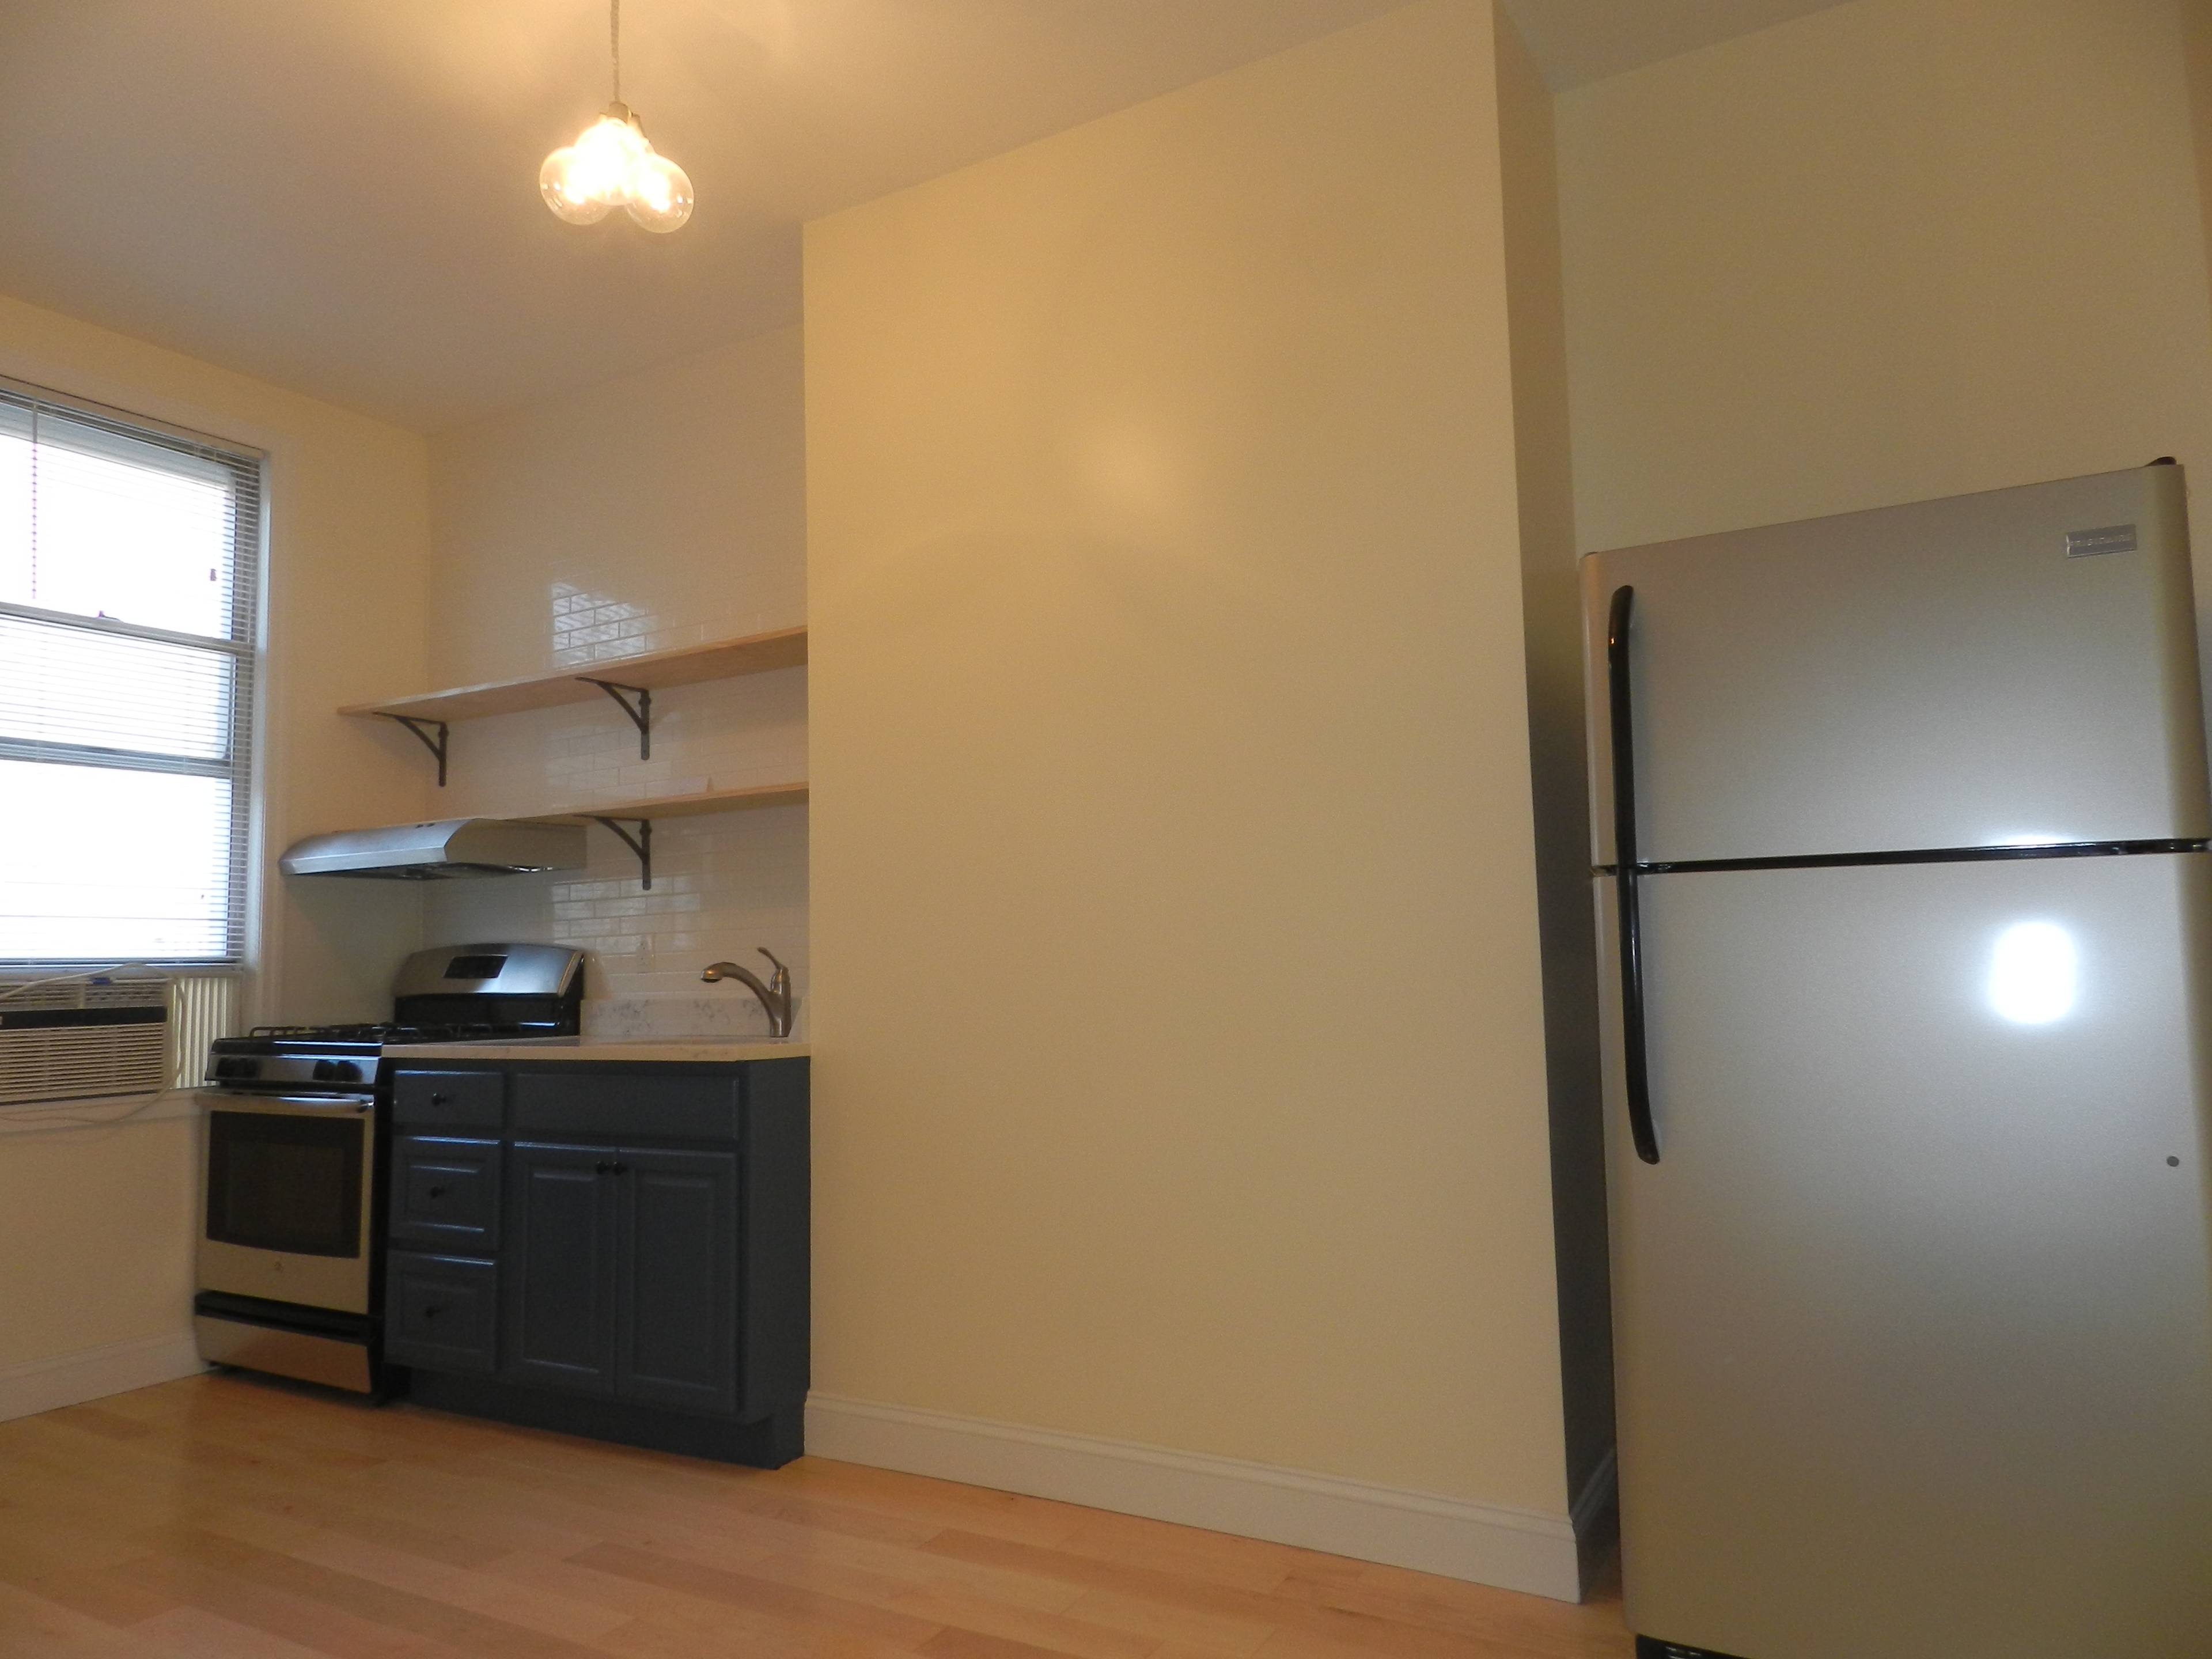 BRAND NEW Stunning 1.5 (Convertible 2) Bedrooms - Railroad Style Apartment by Grand St L Train!!